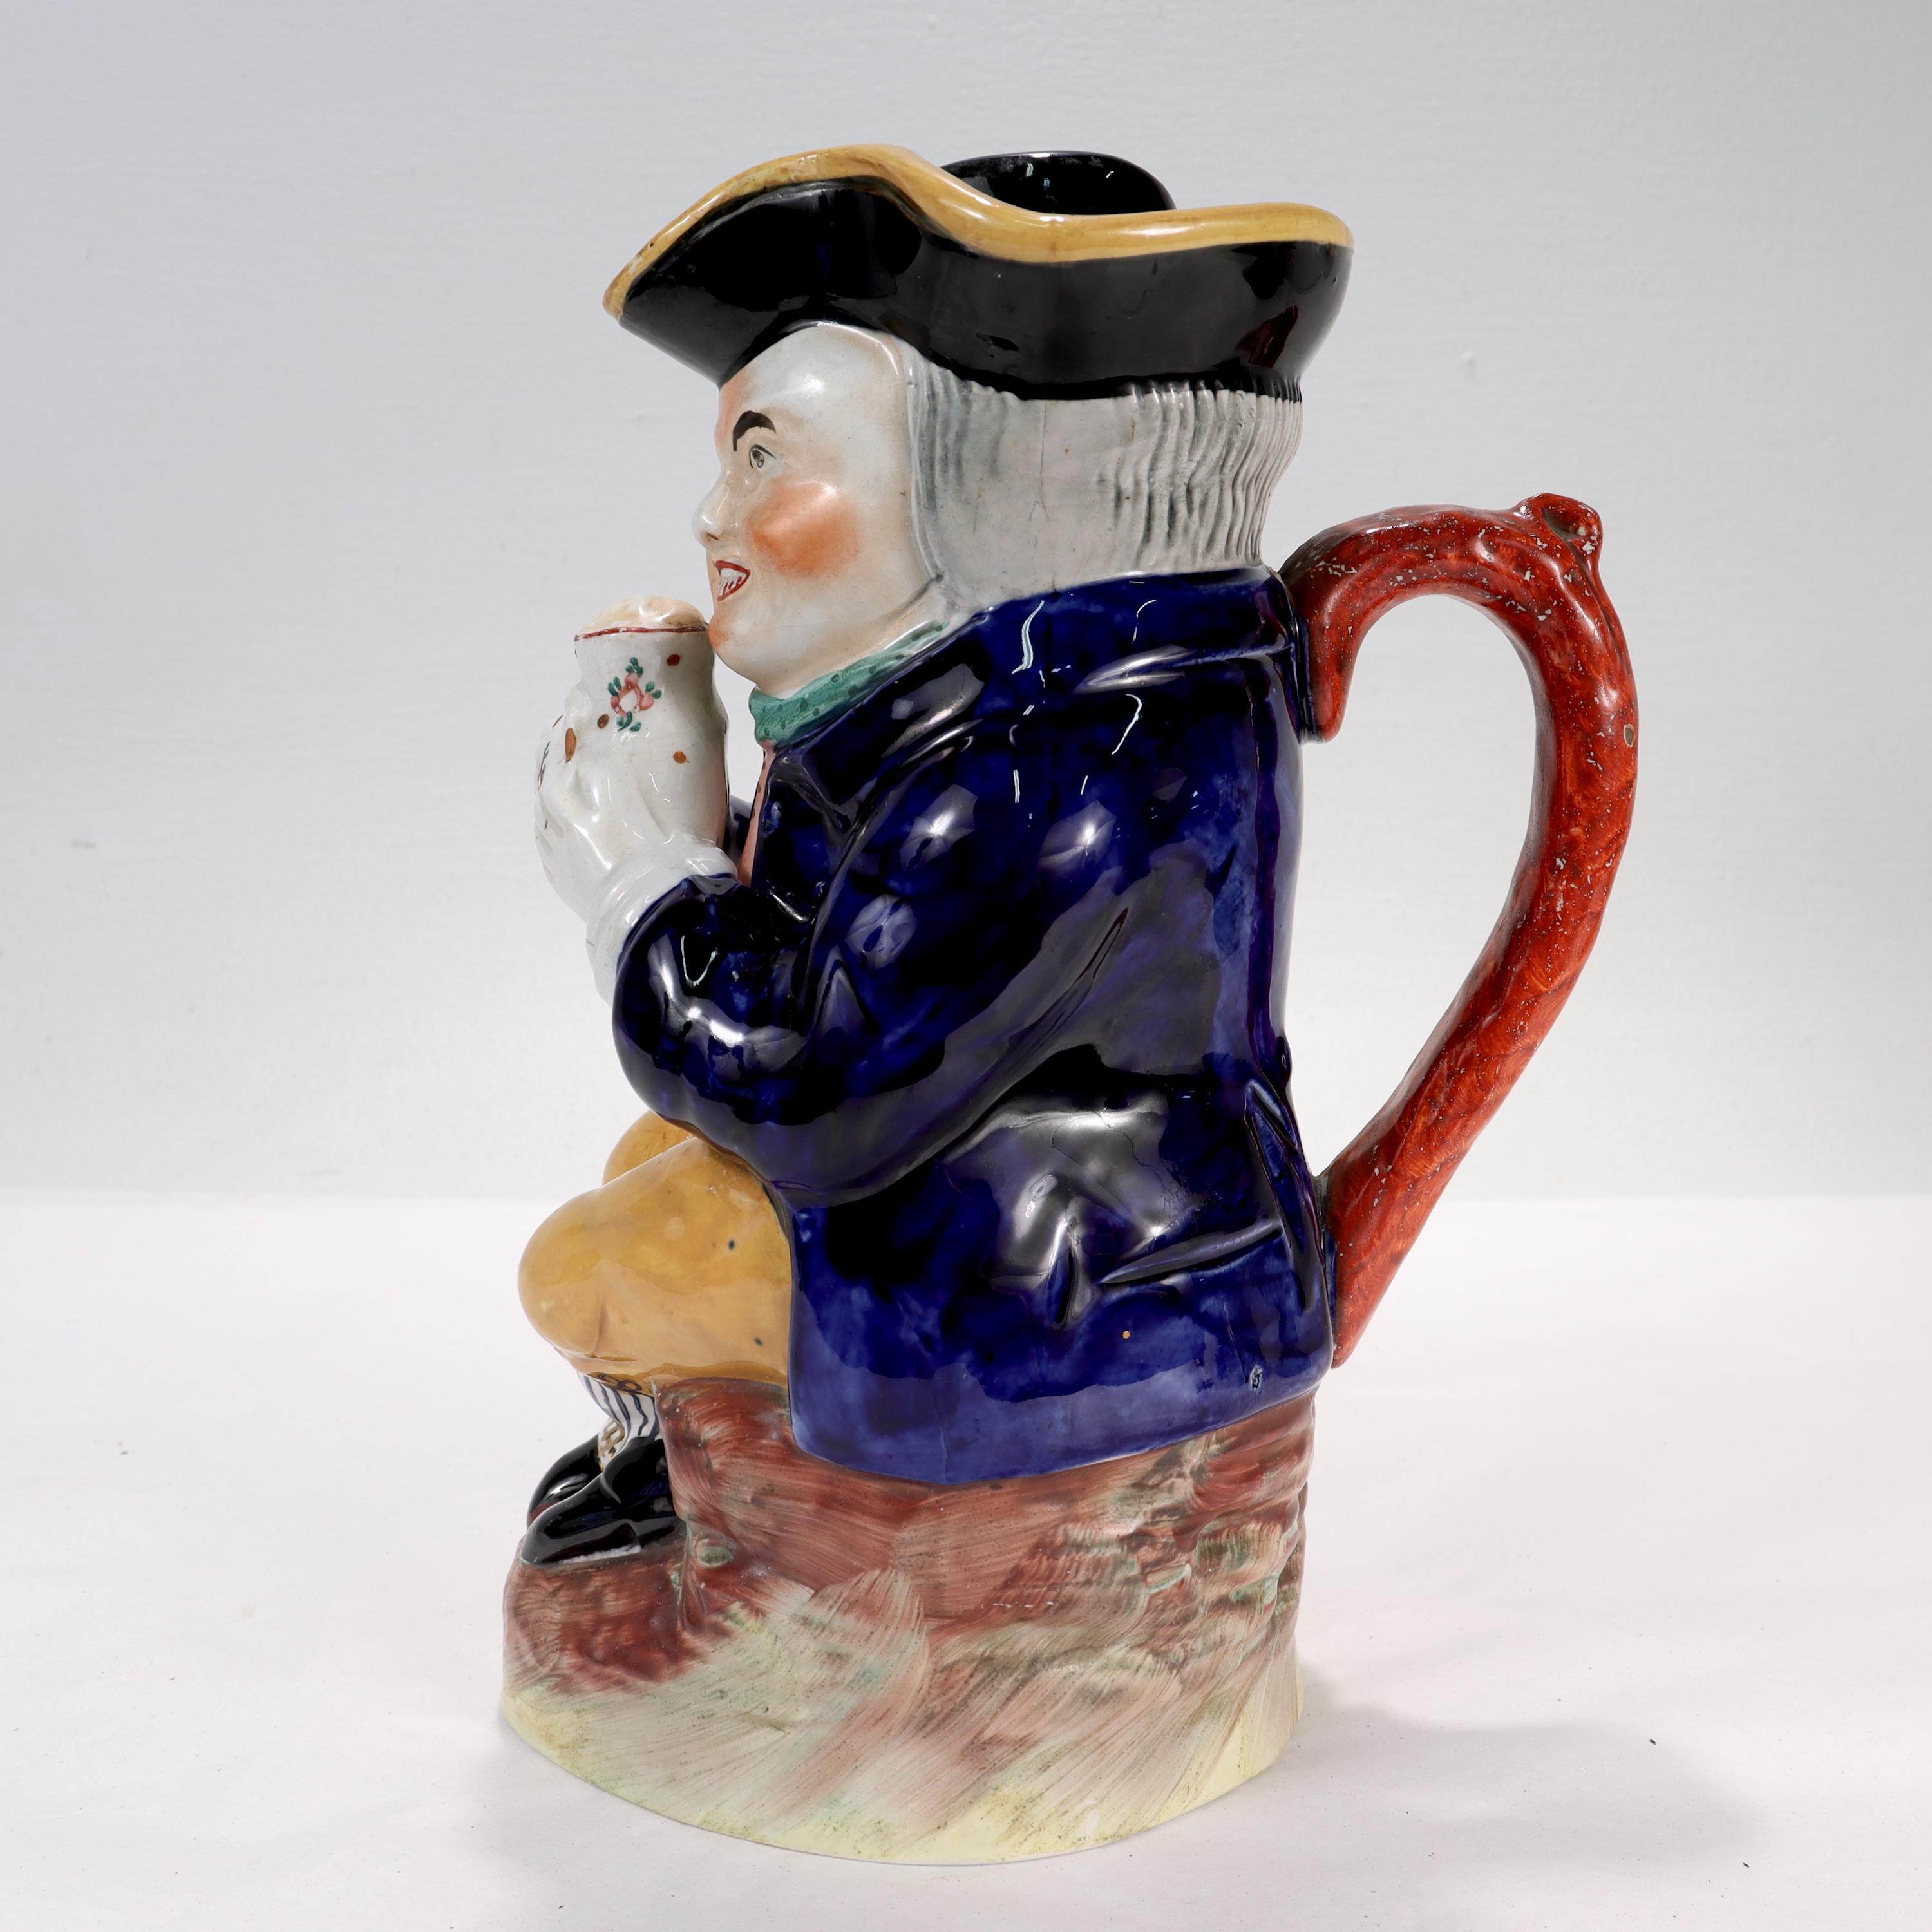 hat on a toby jug